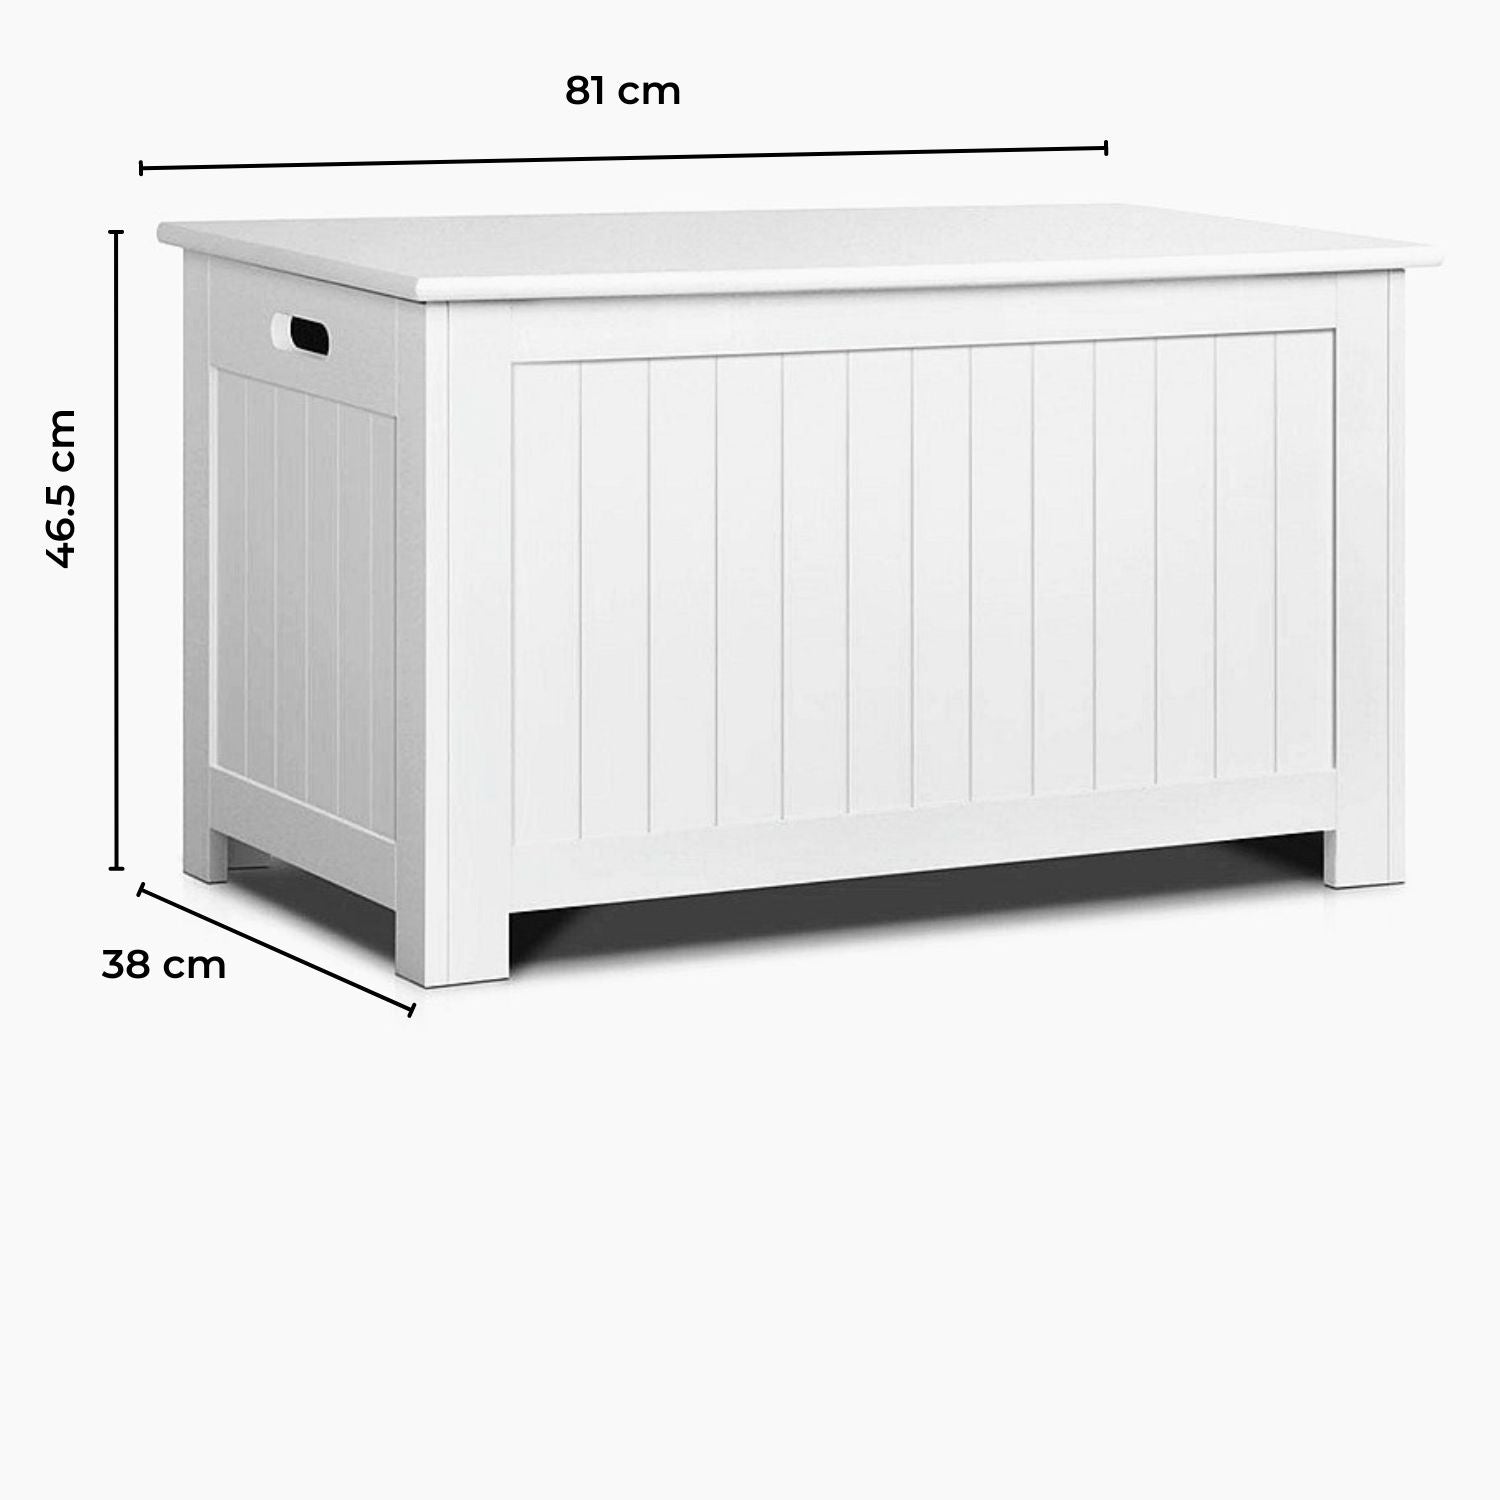 GOMINIMO Kids Toy Storage Box with Lid and Air Gap Handle (White) GO-SBO-100-LR - SILBERSHELL